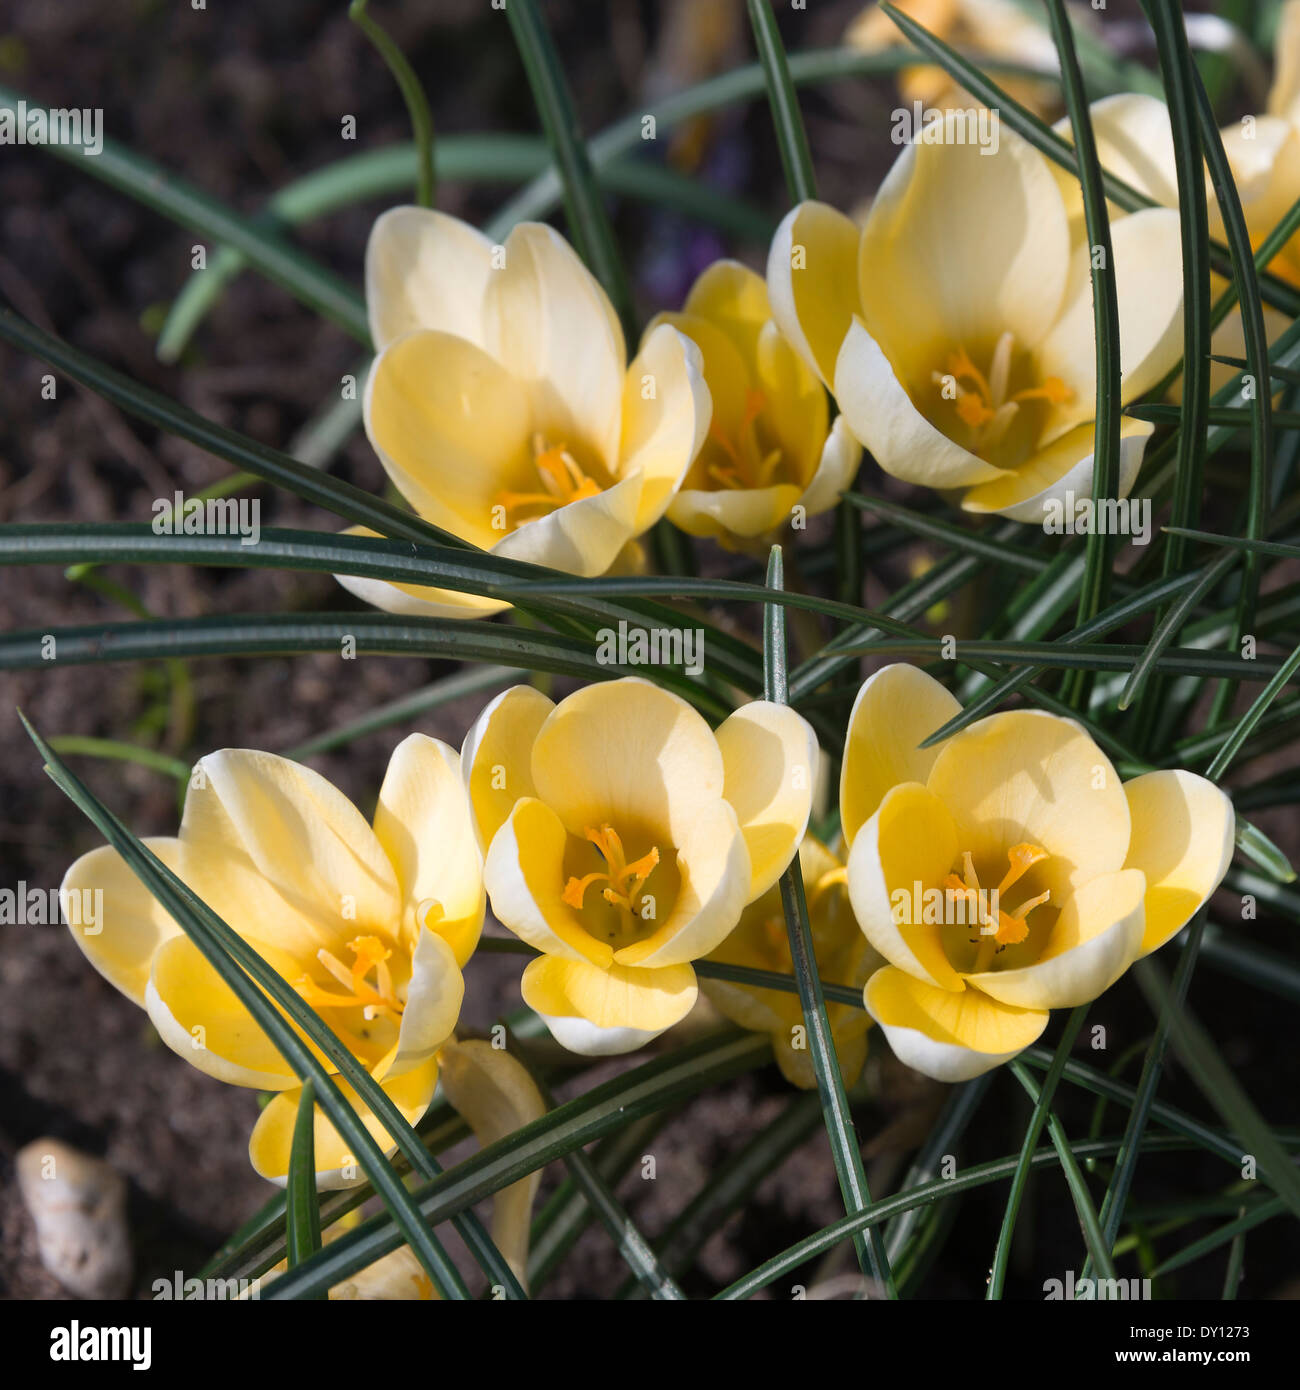 Crocus Flowers in Full Spring Bloom in a Cheshire Garden Alsager England United Kingdom UK Stock Photo